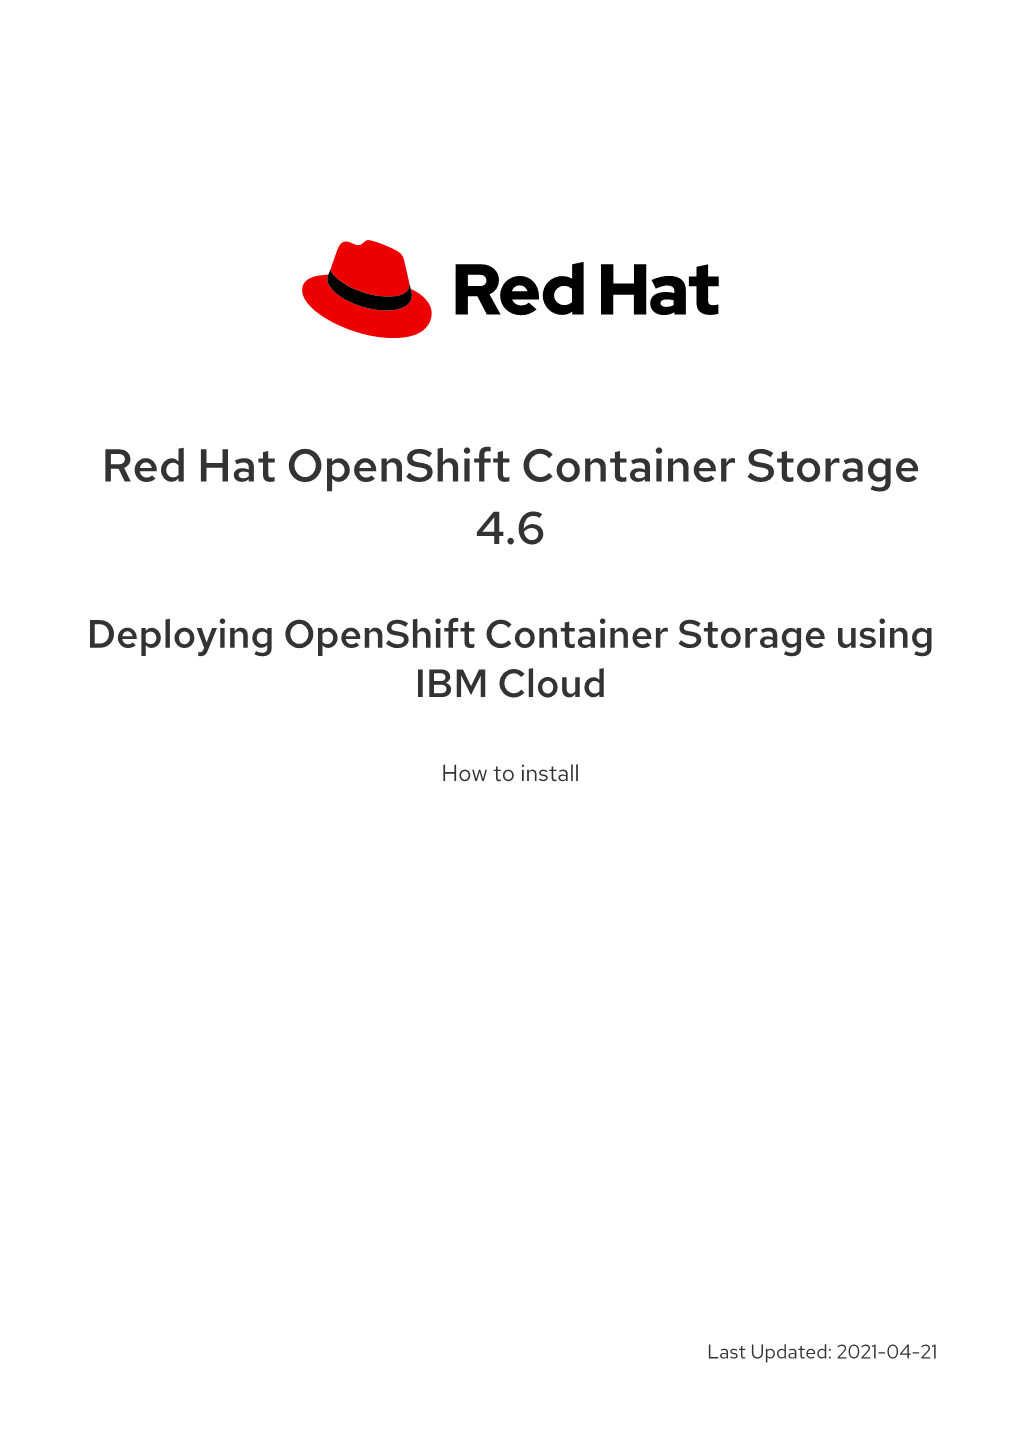 Chapter 1. Deploying Openshift Container Storage Using Ibm Cloud